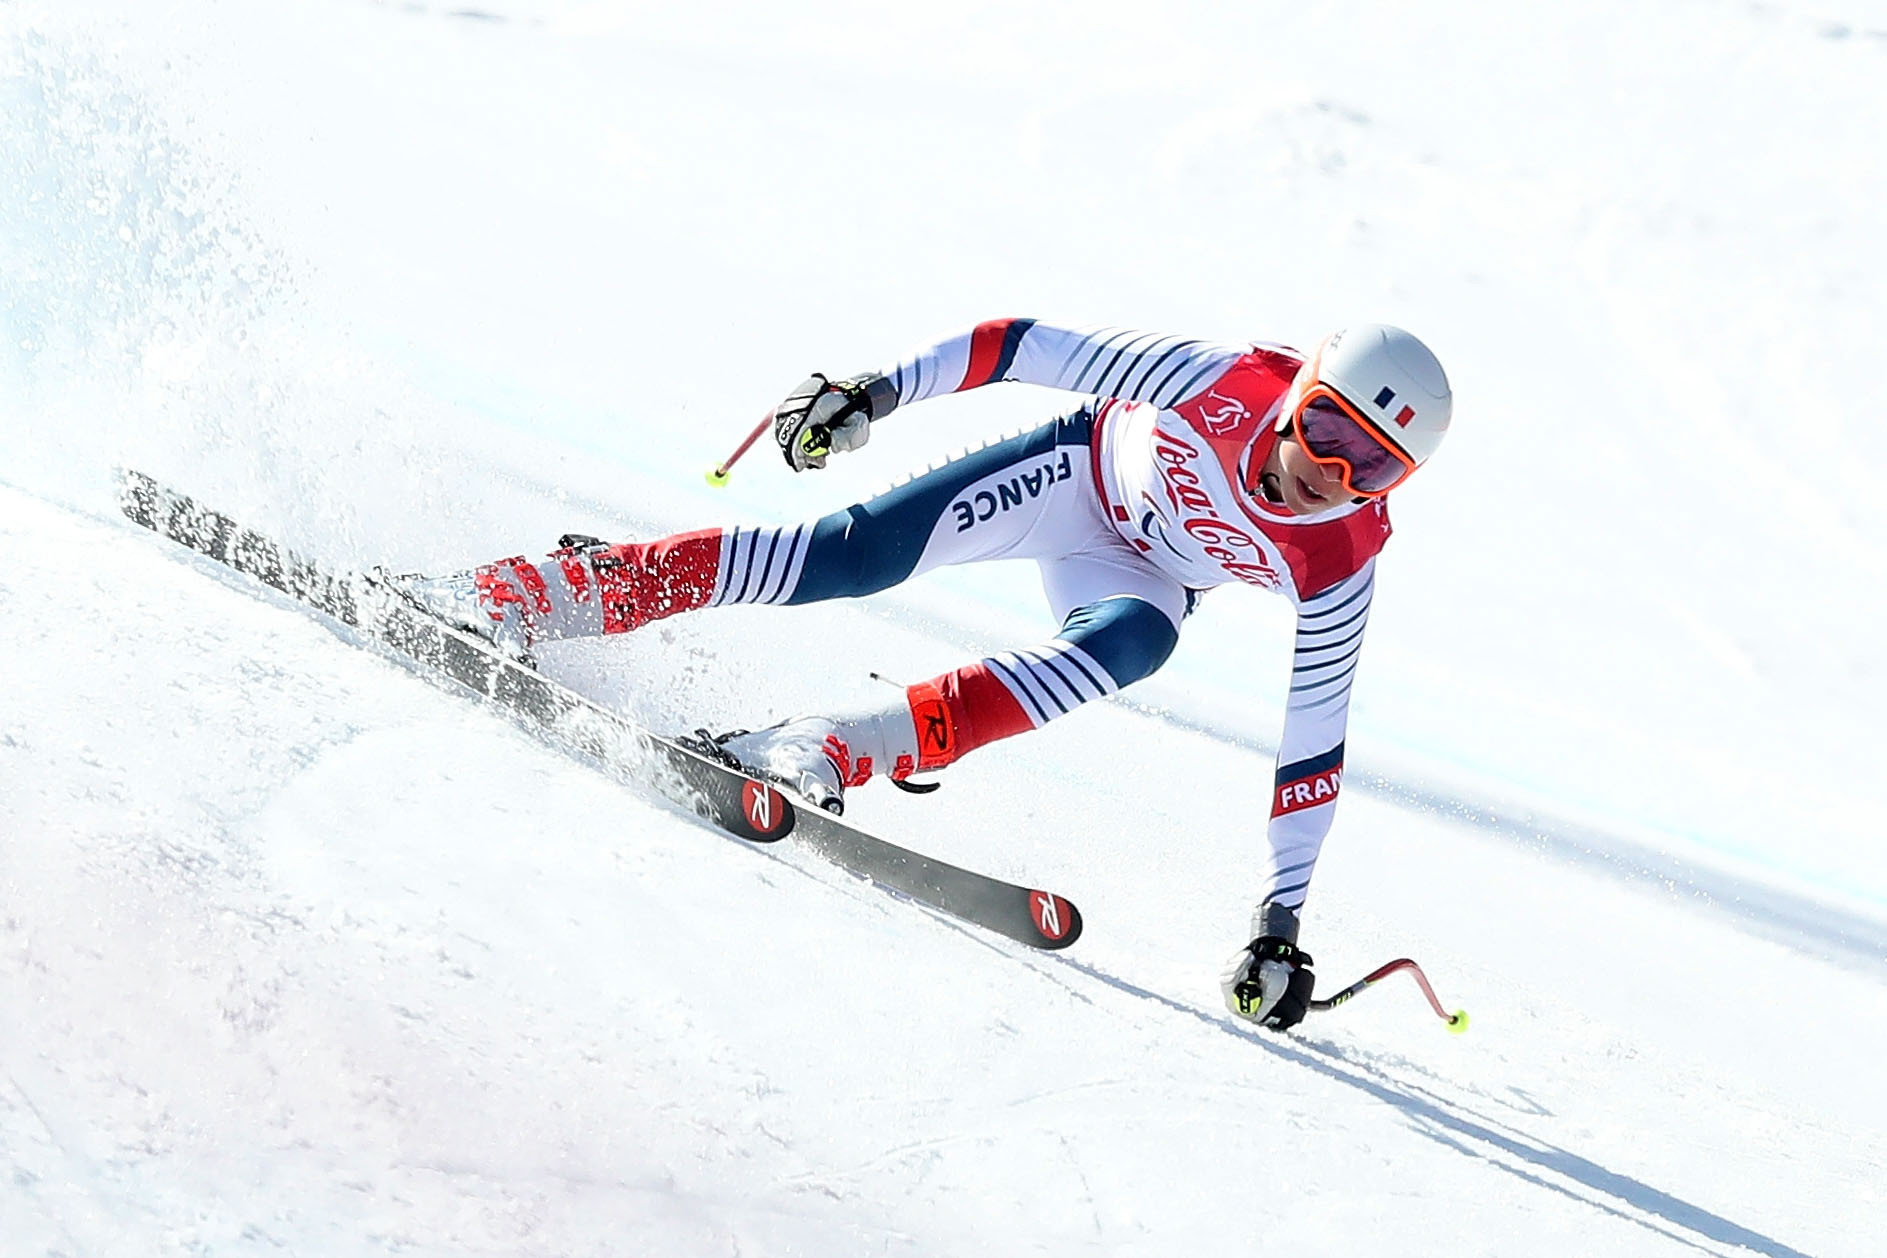 France's four-times Paralympic silver medallist Arthur Bauchet had to settle for second place in the opening giant slalom race at the event in Leogang ©Getty Images